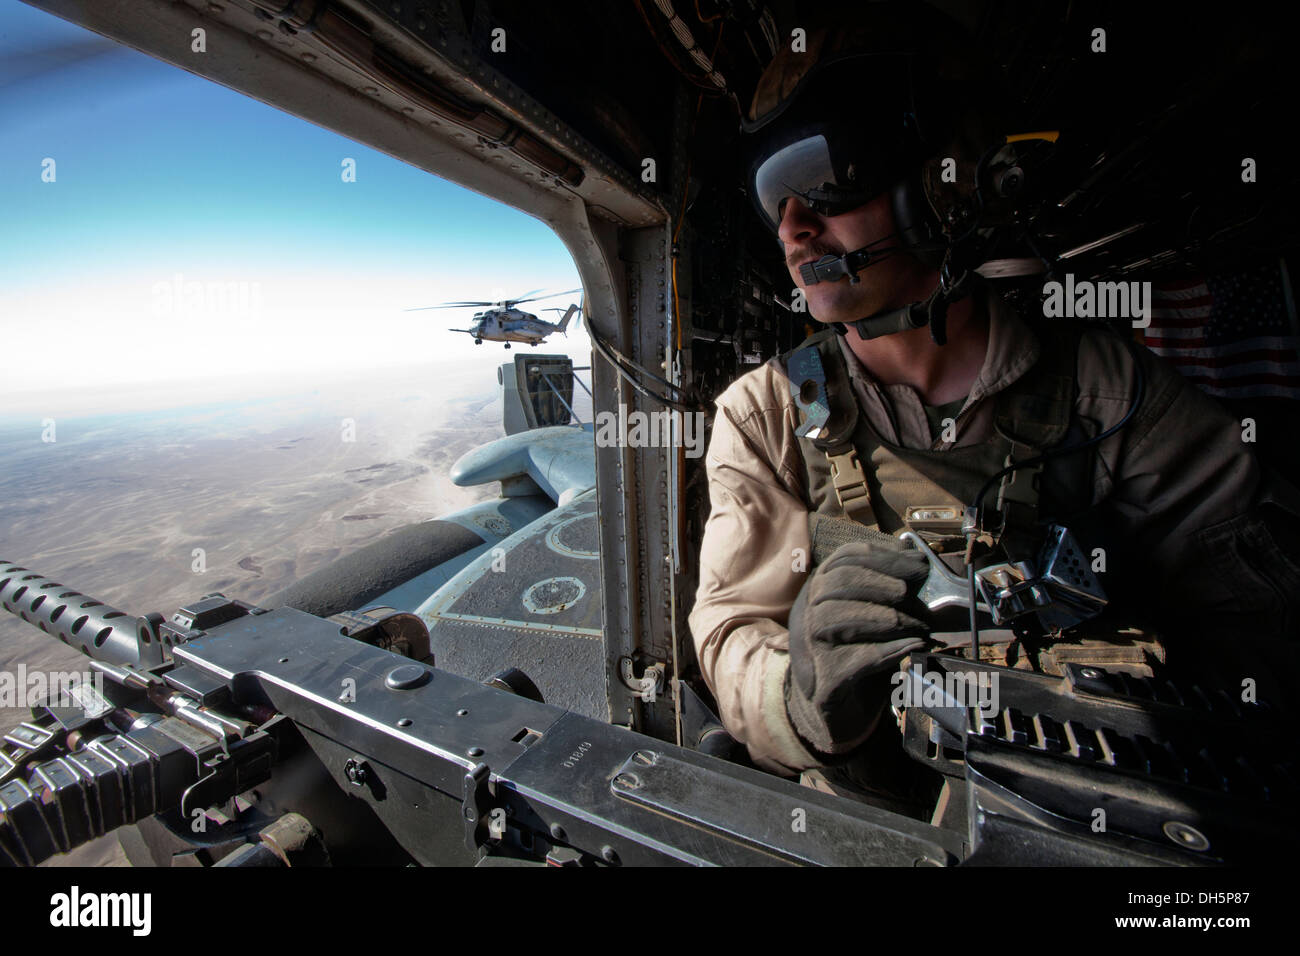 U.S. Marine Corps Lance Cpl. Andrew J. Savoie, a crew chief with Marine Heavy Helicopter Squadron 462 (HMH-462) provides aerial Stock Photo